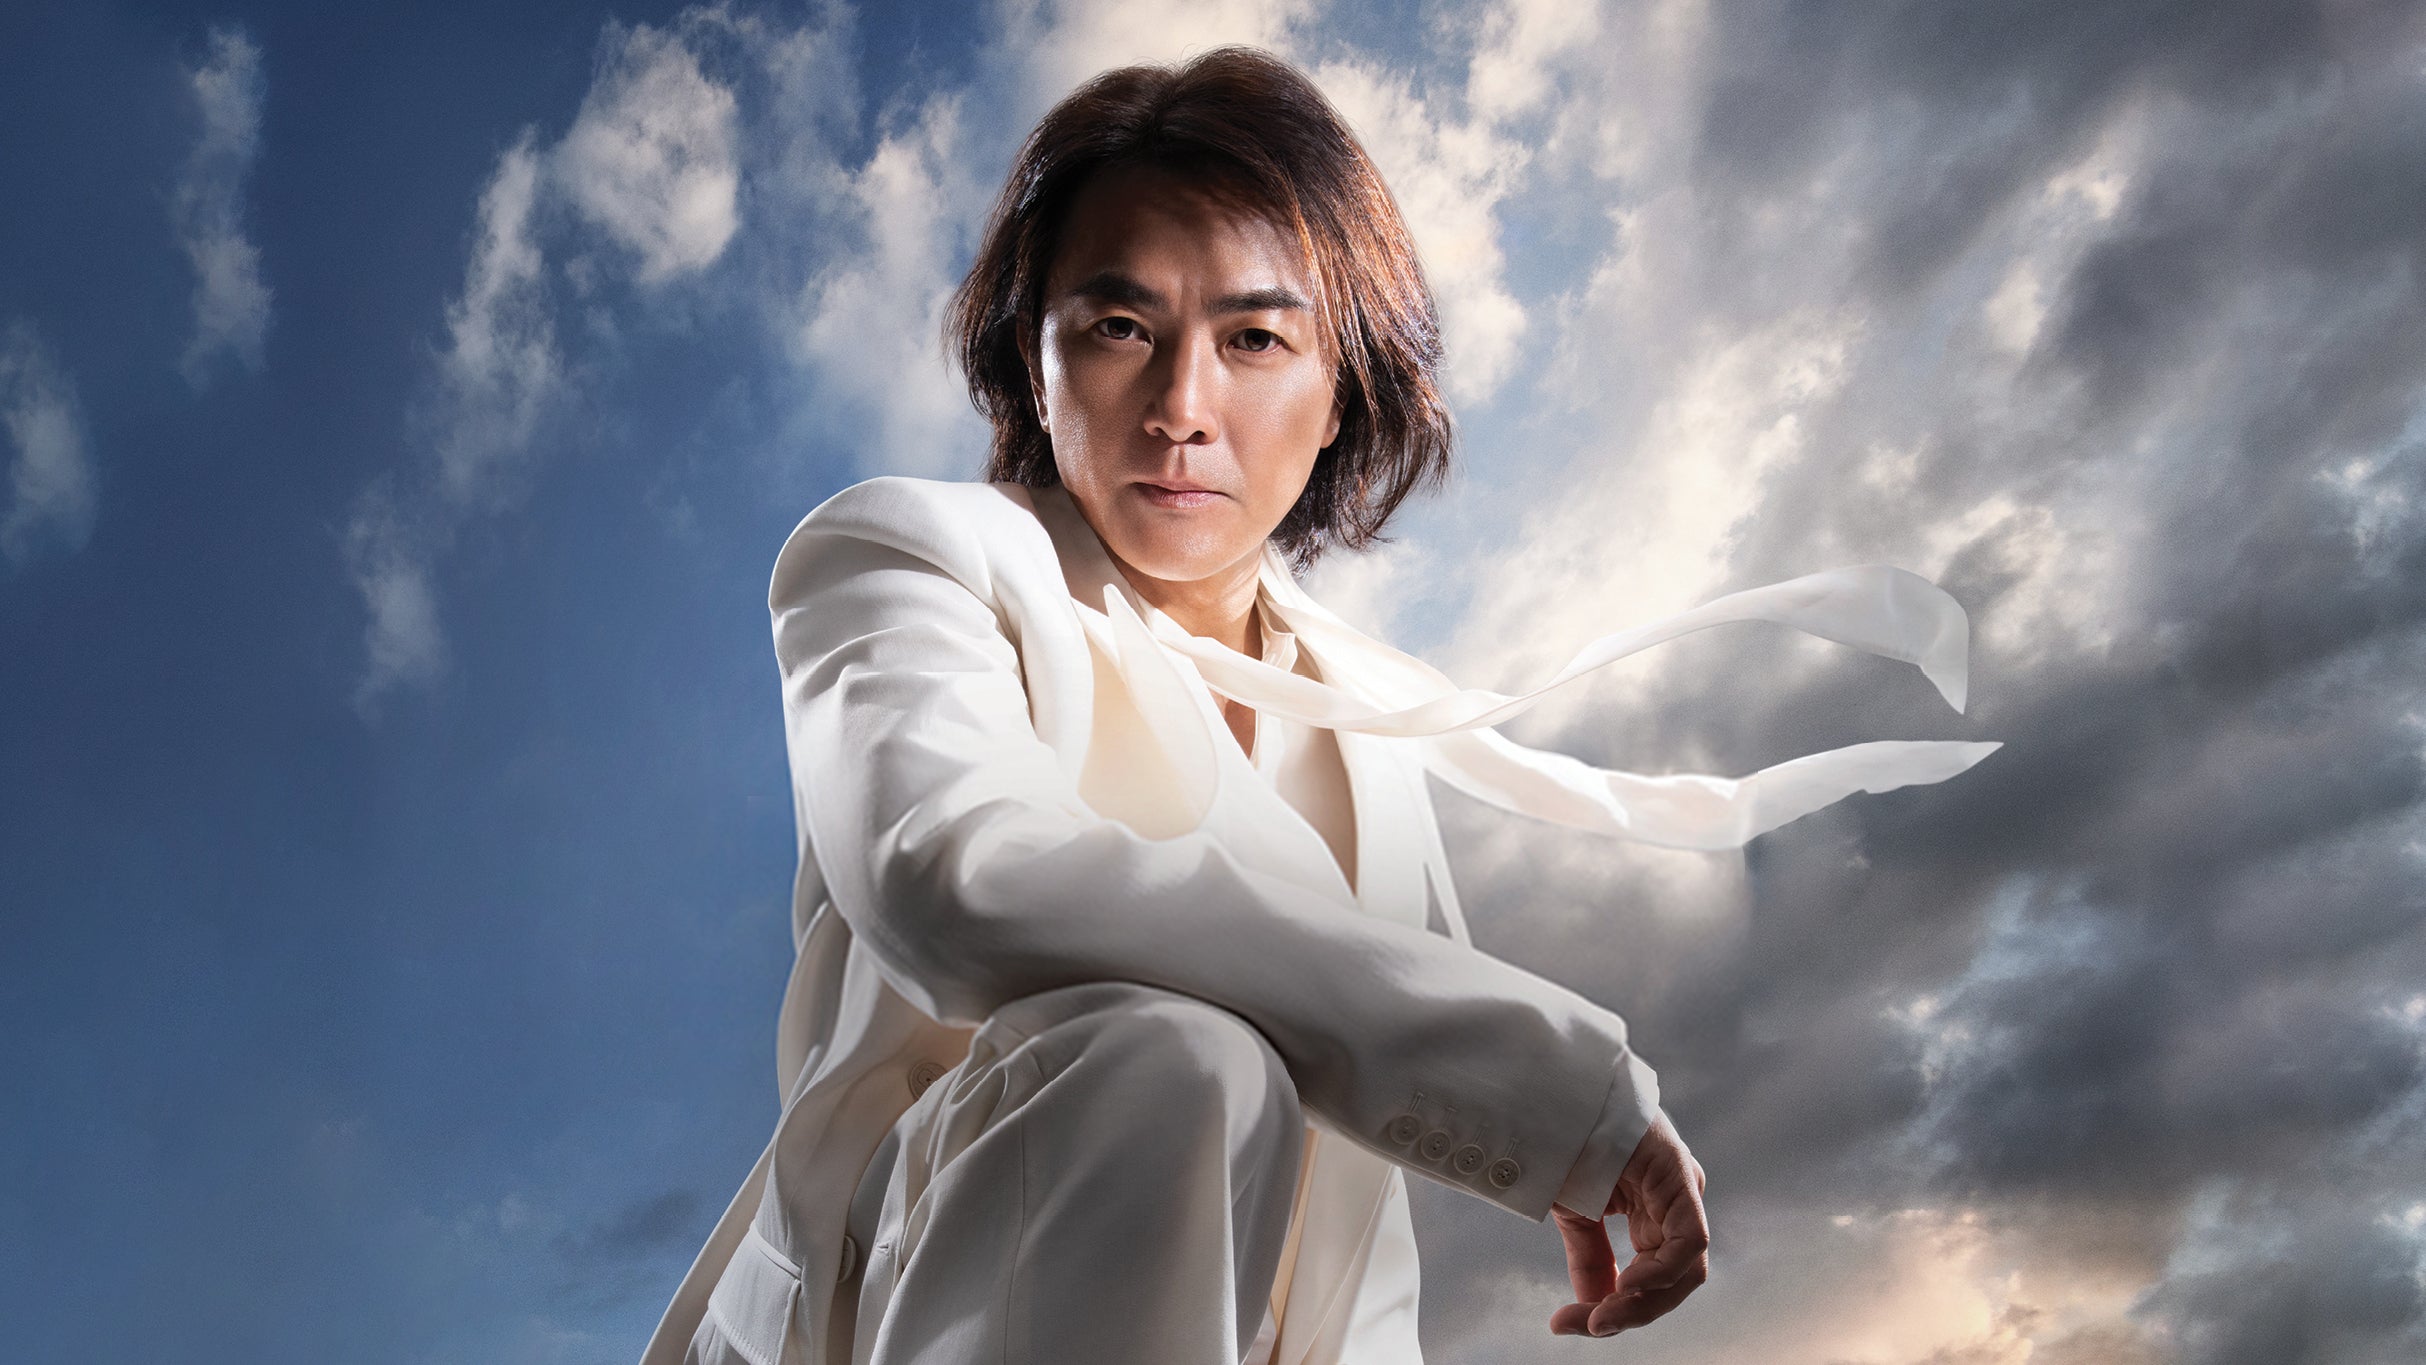 Ekin Cheng in London promo photo for Priority from O2 presale offer code